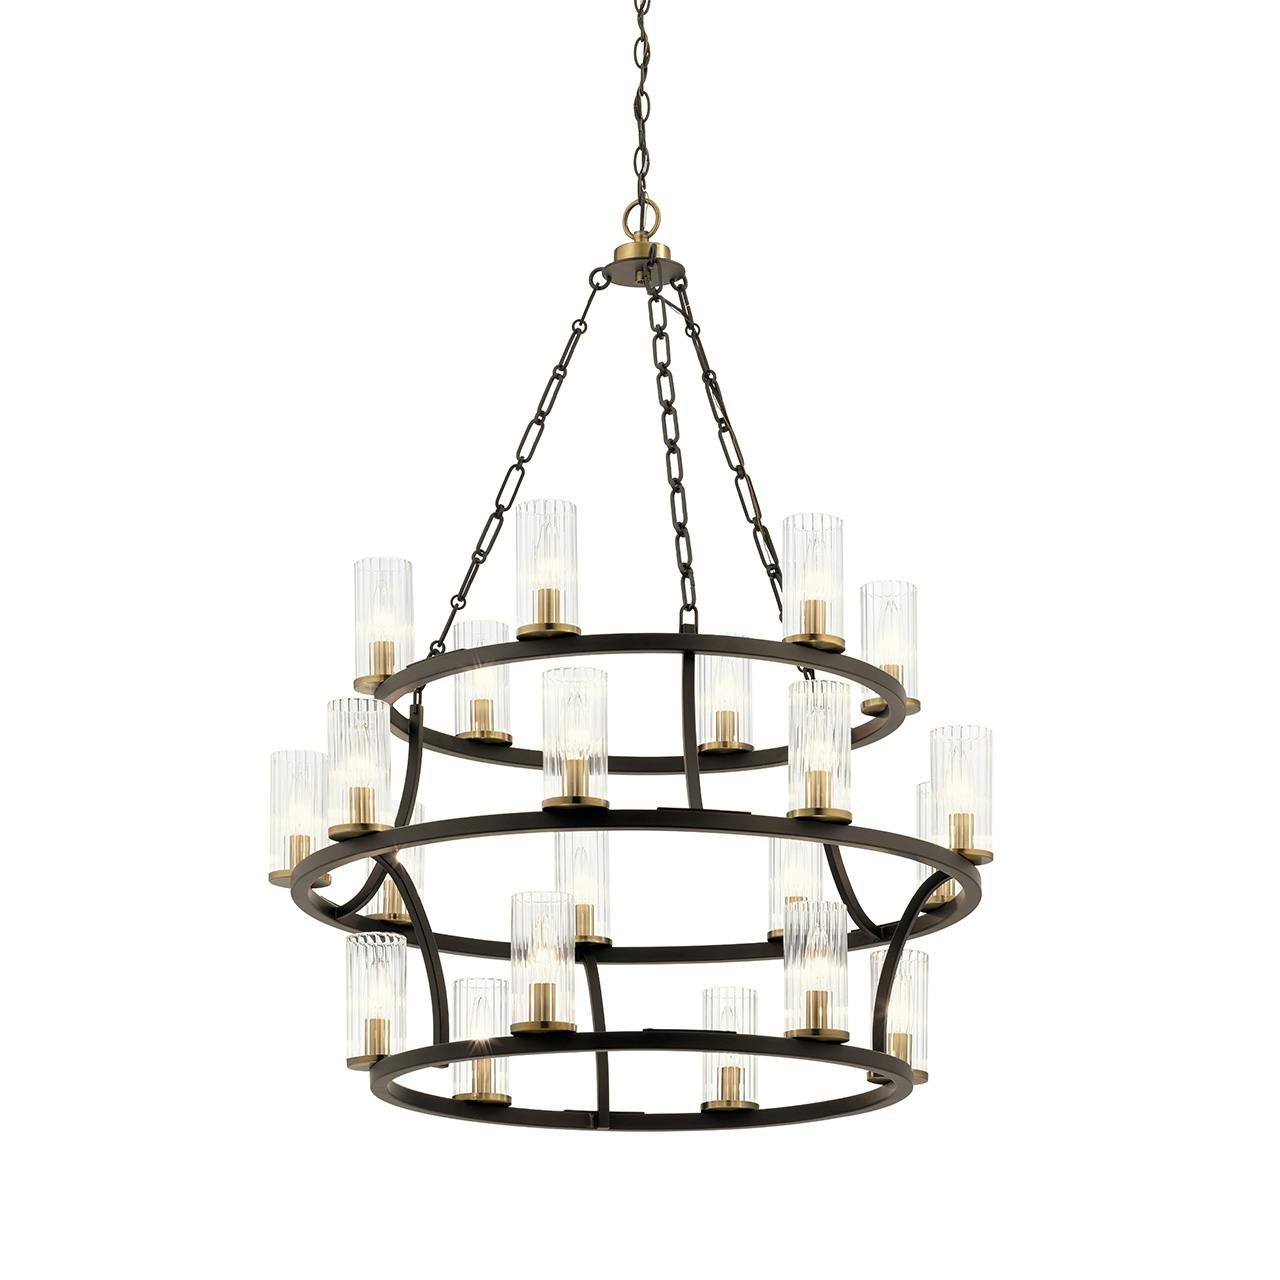 Mathias 21 Light 3 Tier Chandelier Bronze without the canopy on a white background